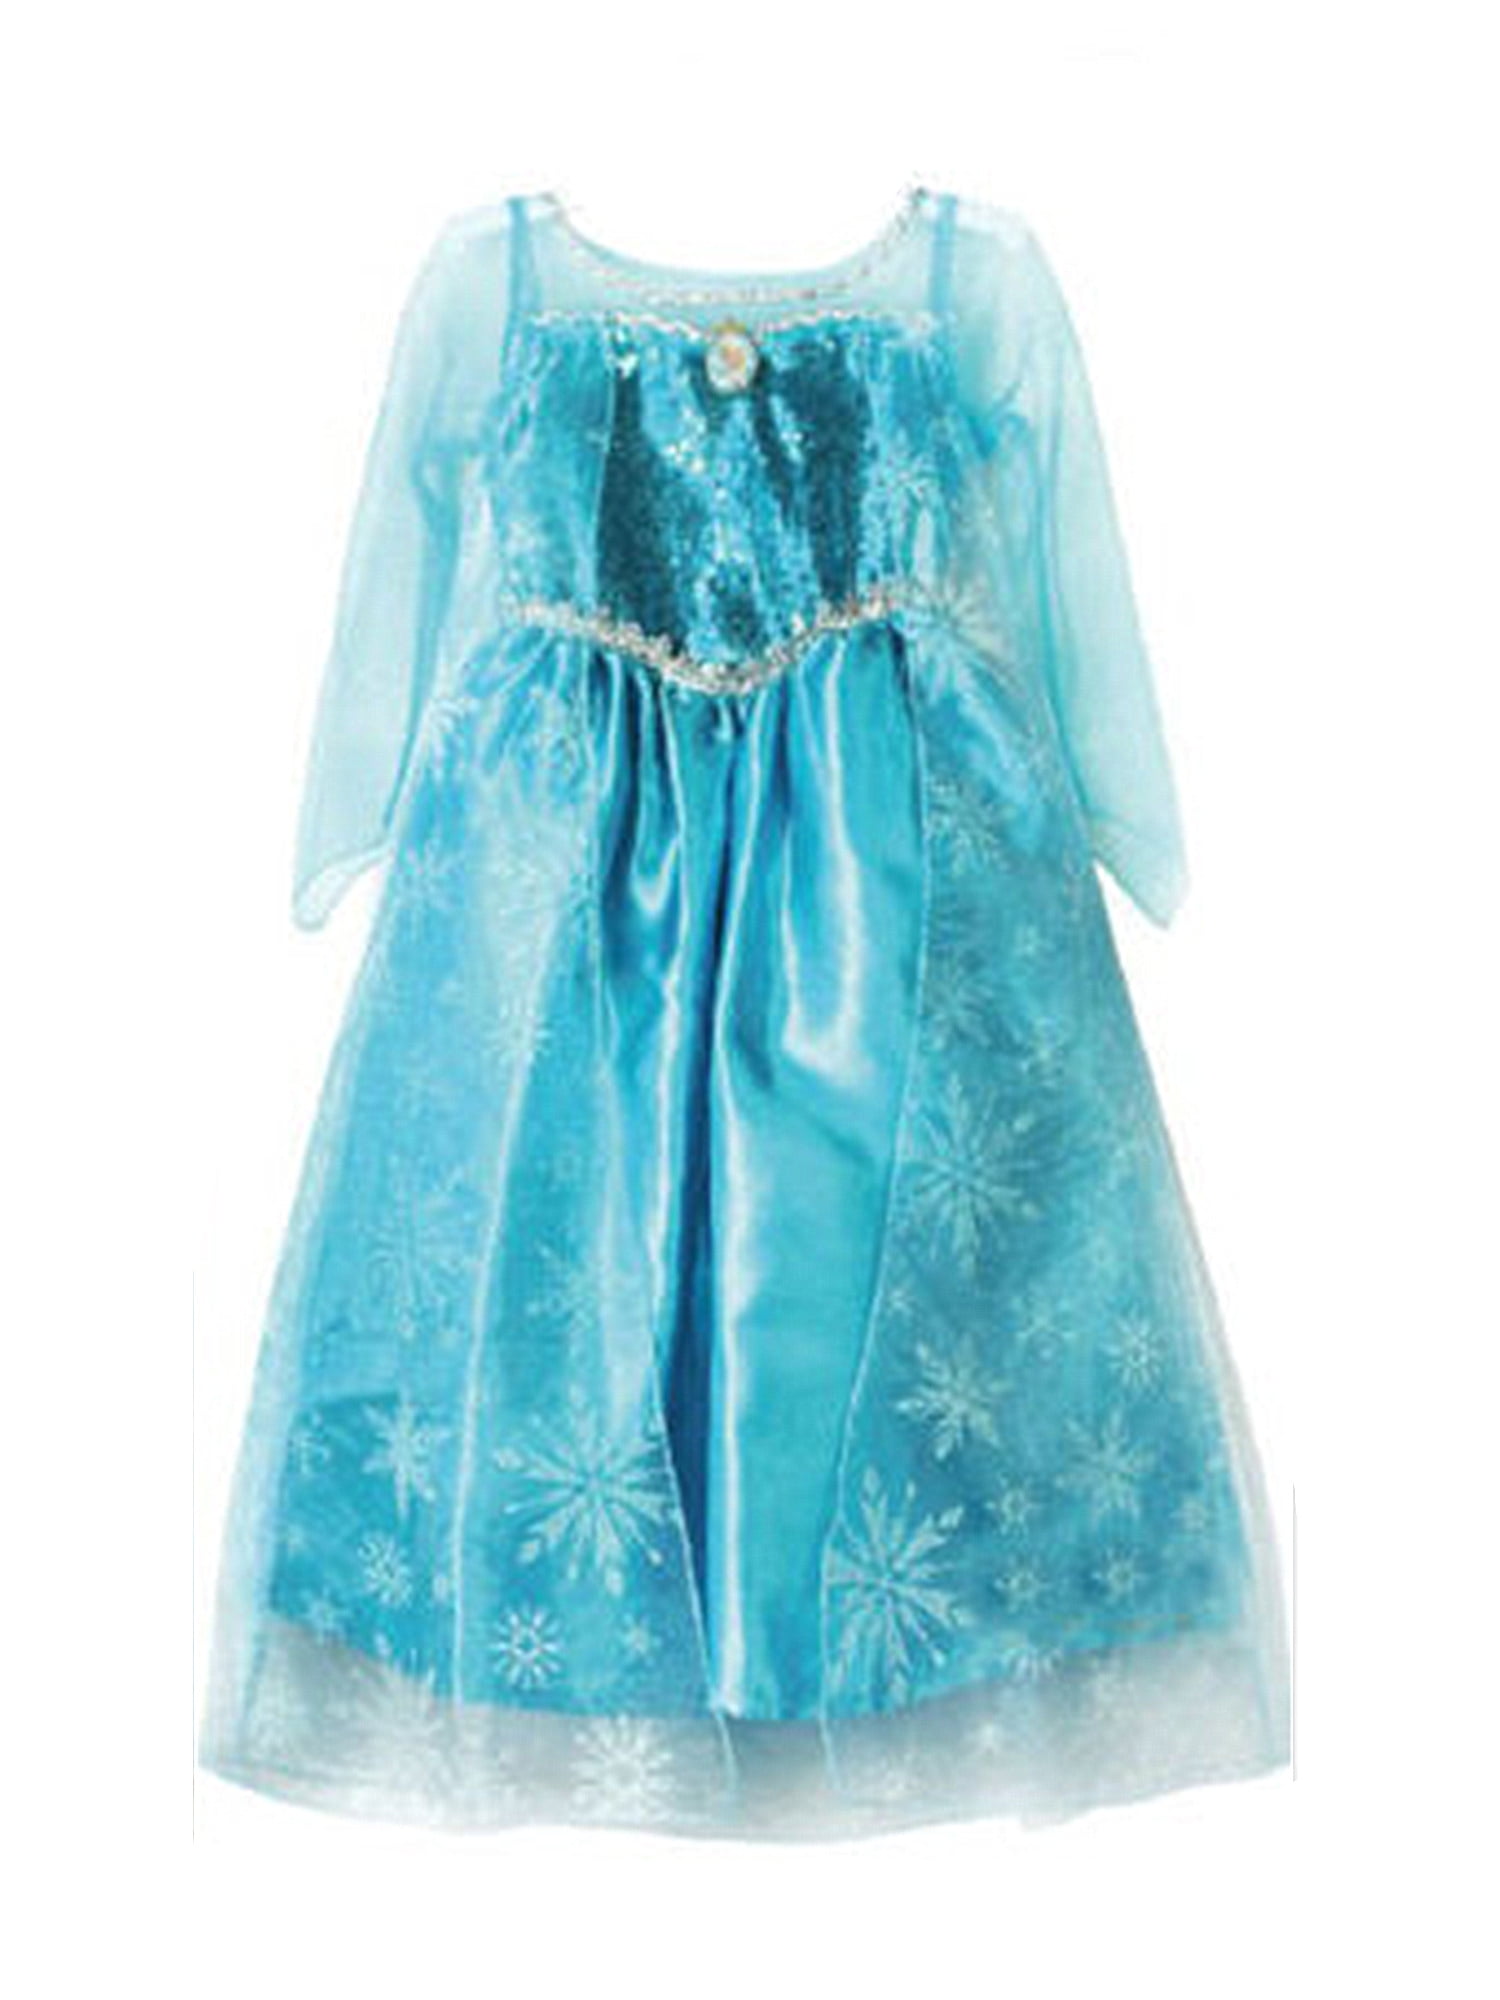 Frozen Anna Princess Dresses Toddler Kid Girls Cosplay Costume Party Fancy Dress 